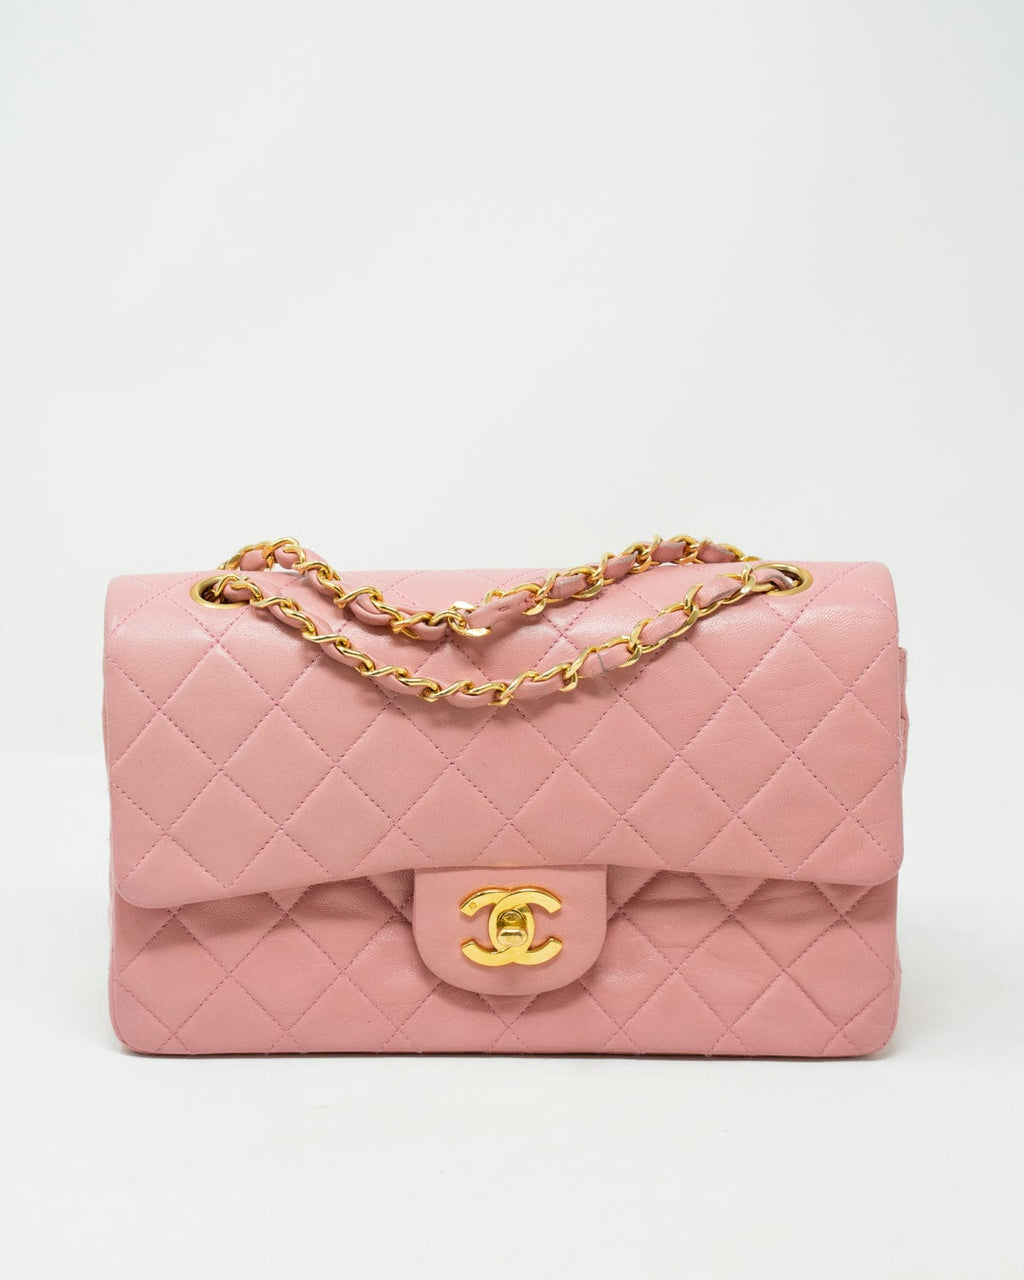 CHANEL Small Bags & CHANEL Classic Flap Handbags for Women